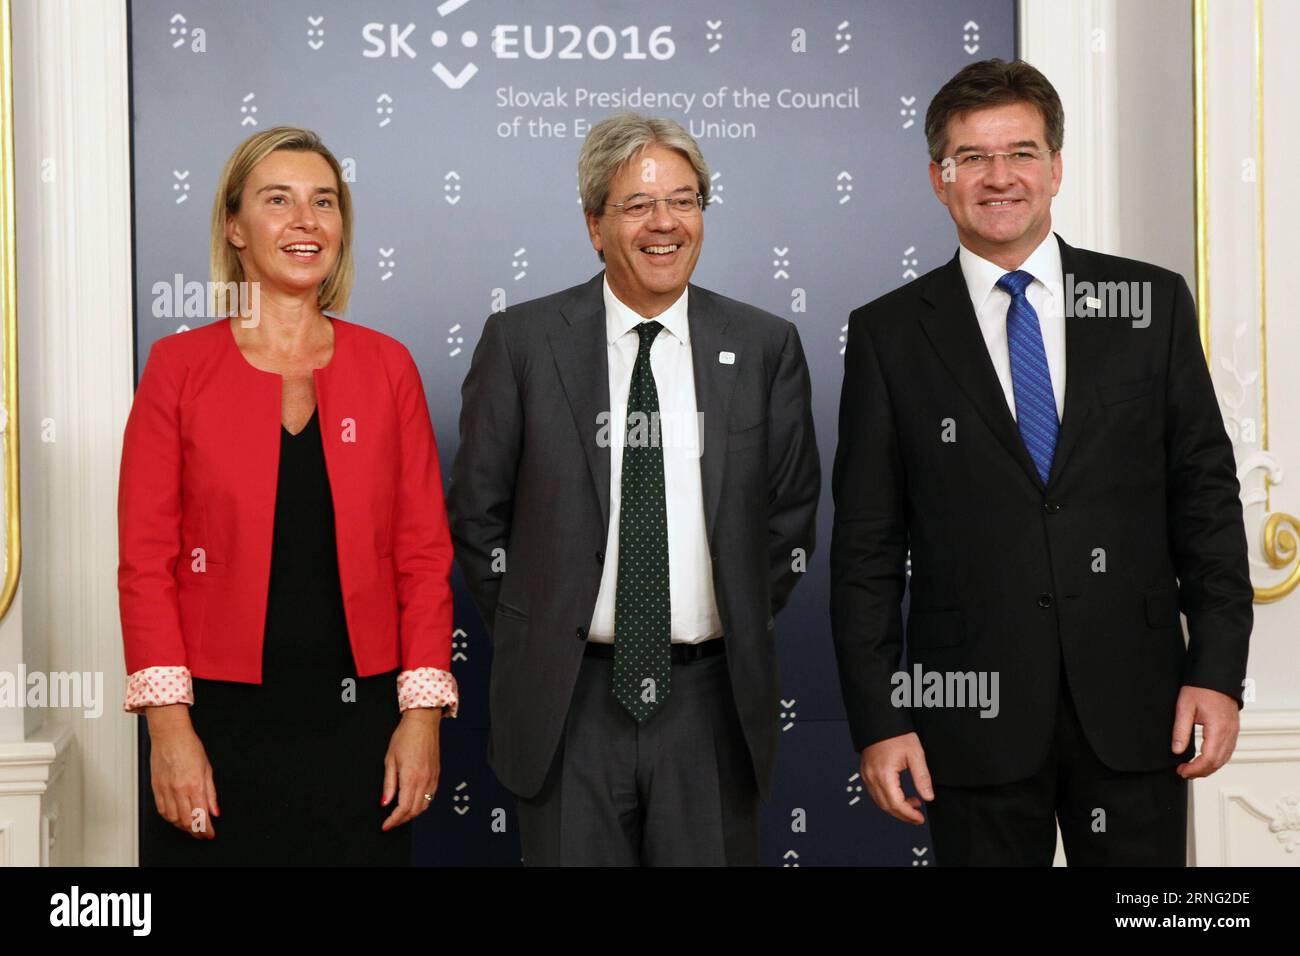 (160902) -- BRATISLAVA, Sept.2, 2016 -- Slovak Minister of foreign and European Affairs Mirislav Lajcak (R) and European Union (EU) High Representative for Foreign Affairs and Security Policy Federica Mogherini (L) welcome Italian Foreign Minister Paolo Gentiloni before the informal meeting of foreign affairs ministers, also known as Gymnich, in Bratislava, capital of Slovakia, Sept. 2, 2016. The current issues of global foreign and security policy will be high on the agenda of Gymnich, which kicked off on Friday. ) SLOVAKIA-BRATISLAVA-EU FM MEETING AndrejxKlizan PUBLICATIONxNOTxINxCHN   16090 Stock Photo